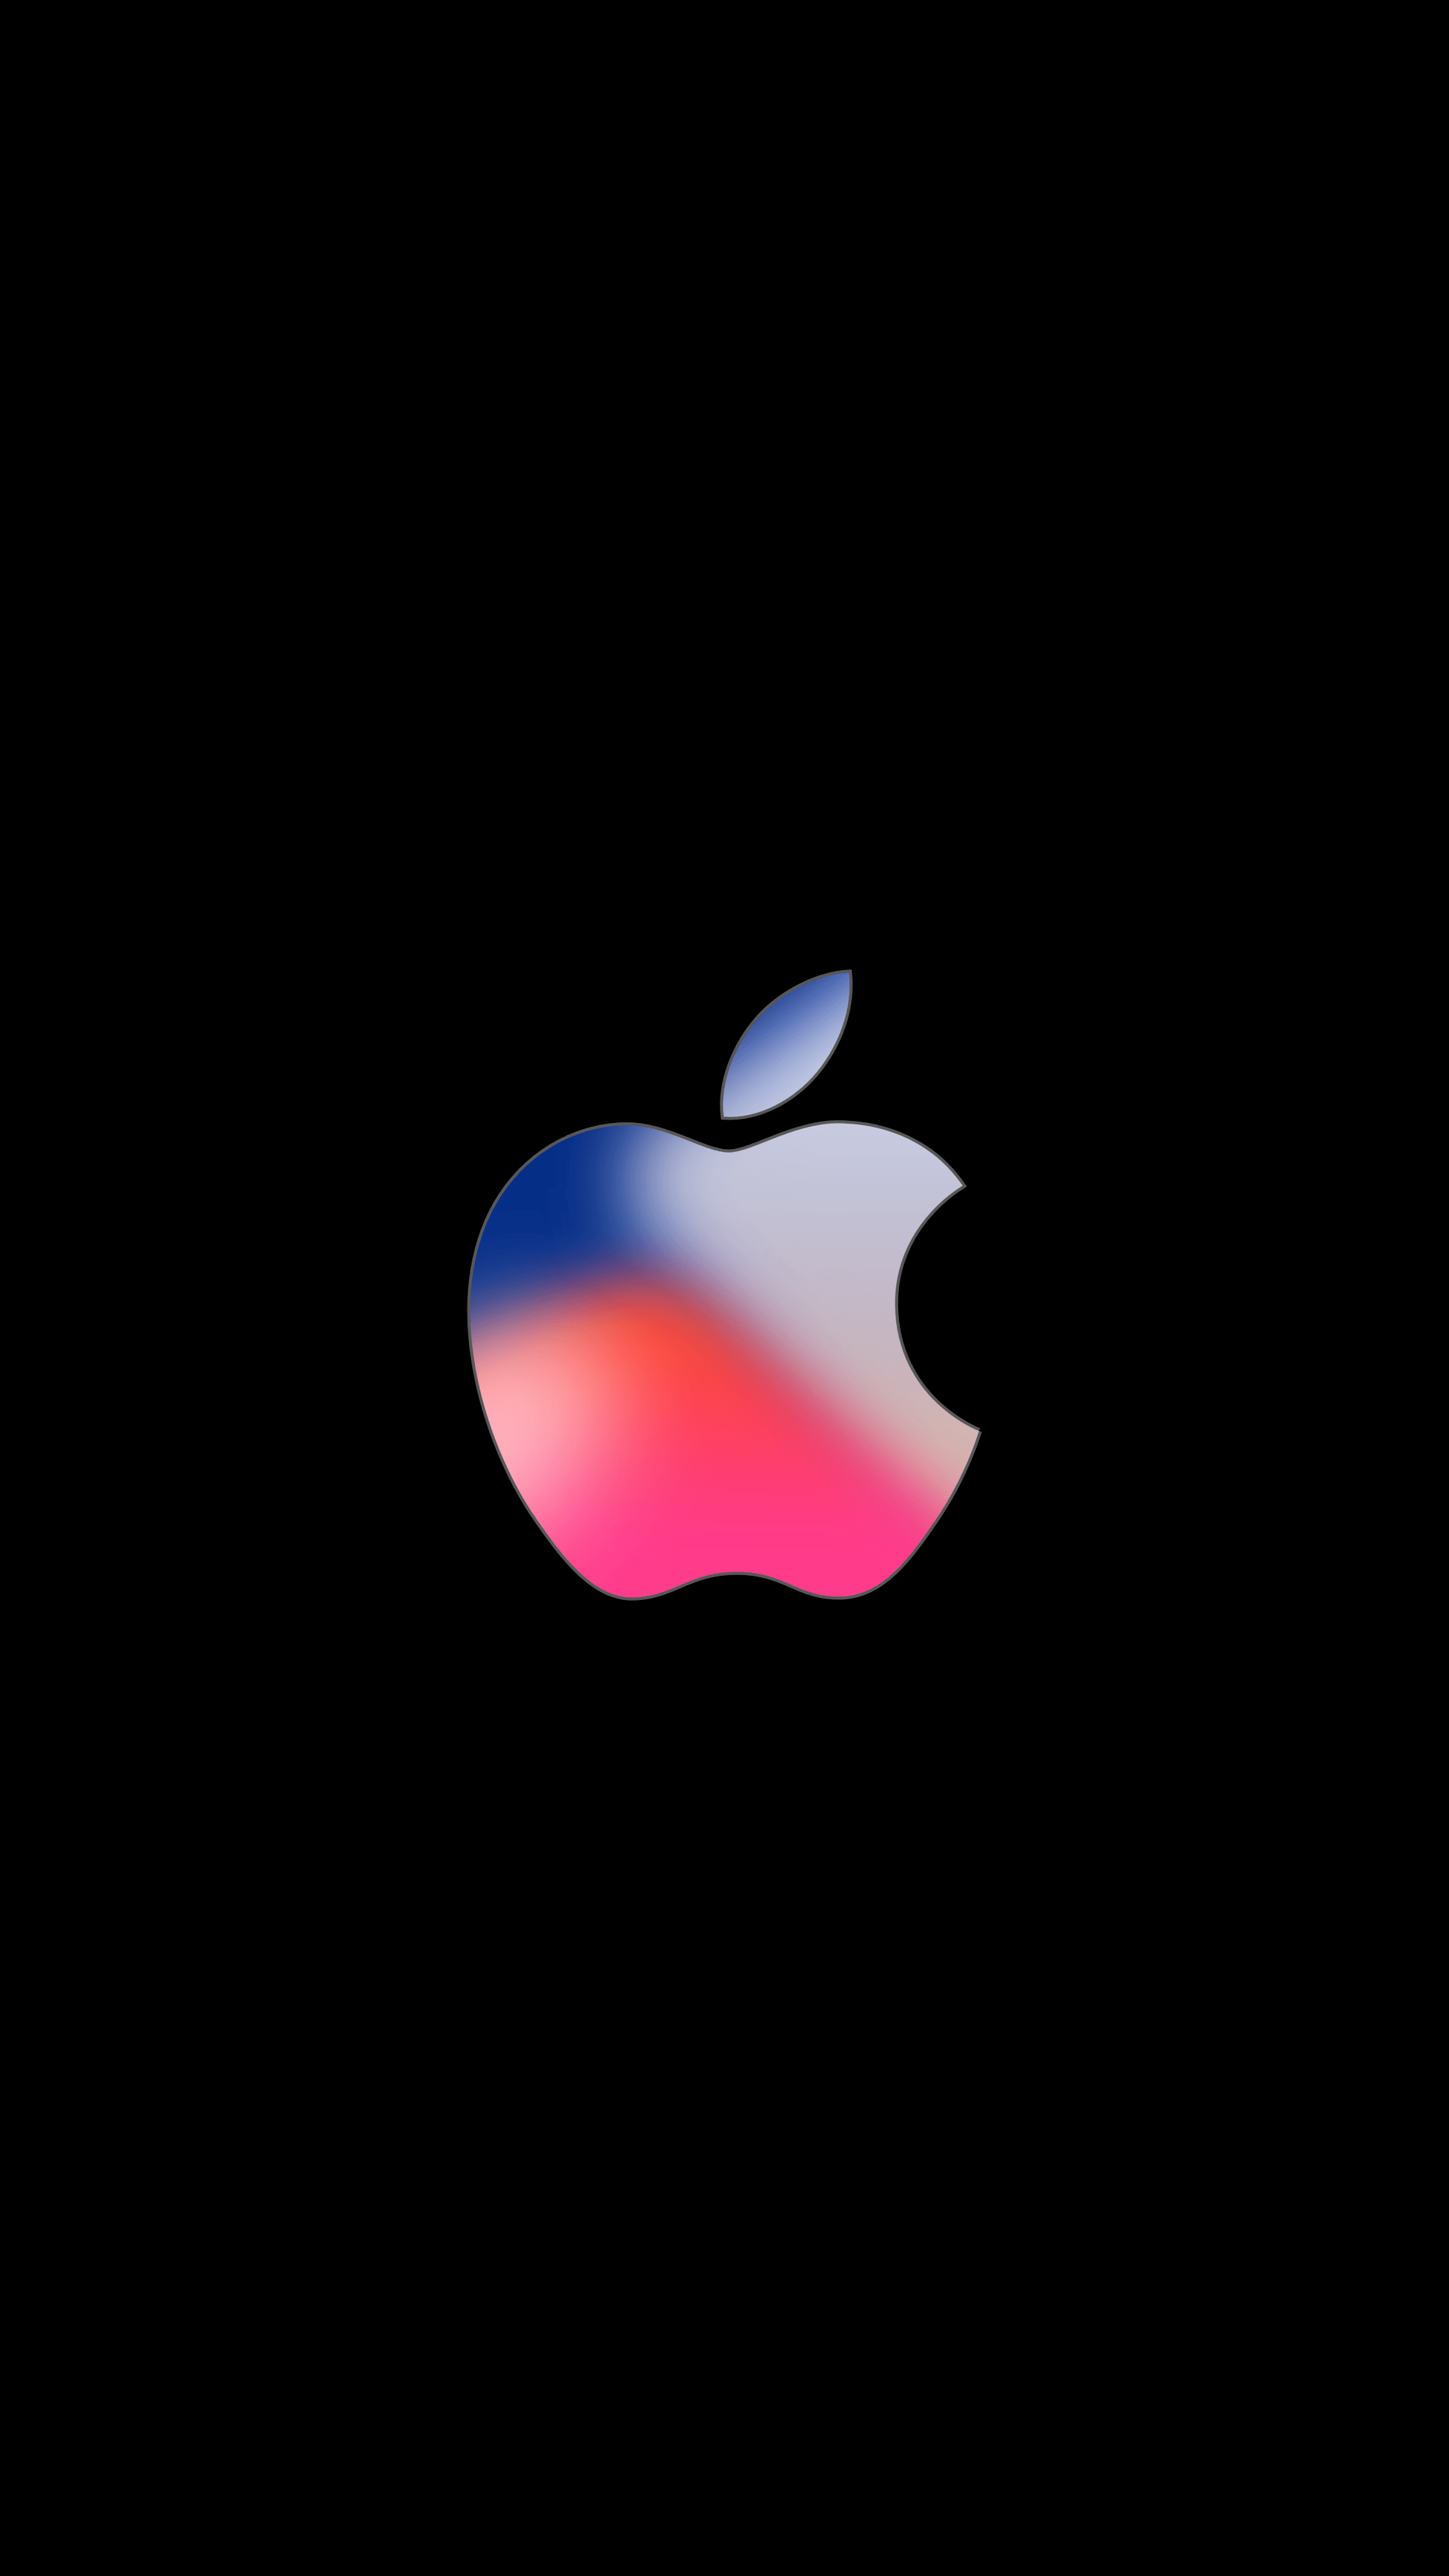 Apple iphone theme k wallpapers